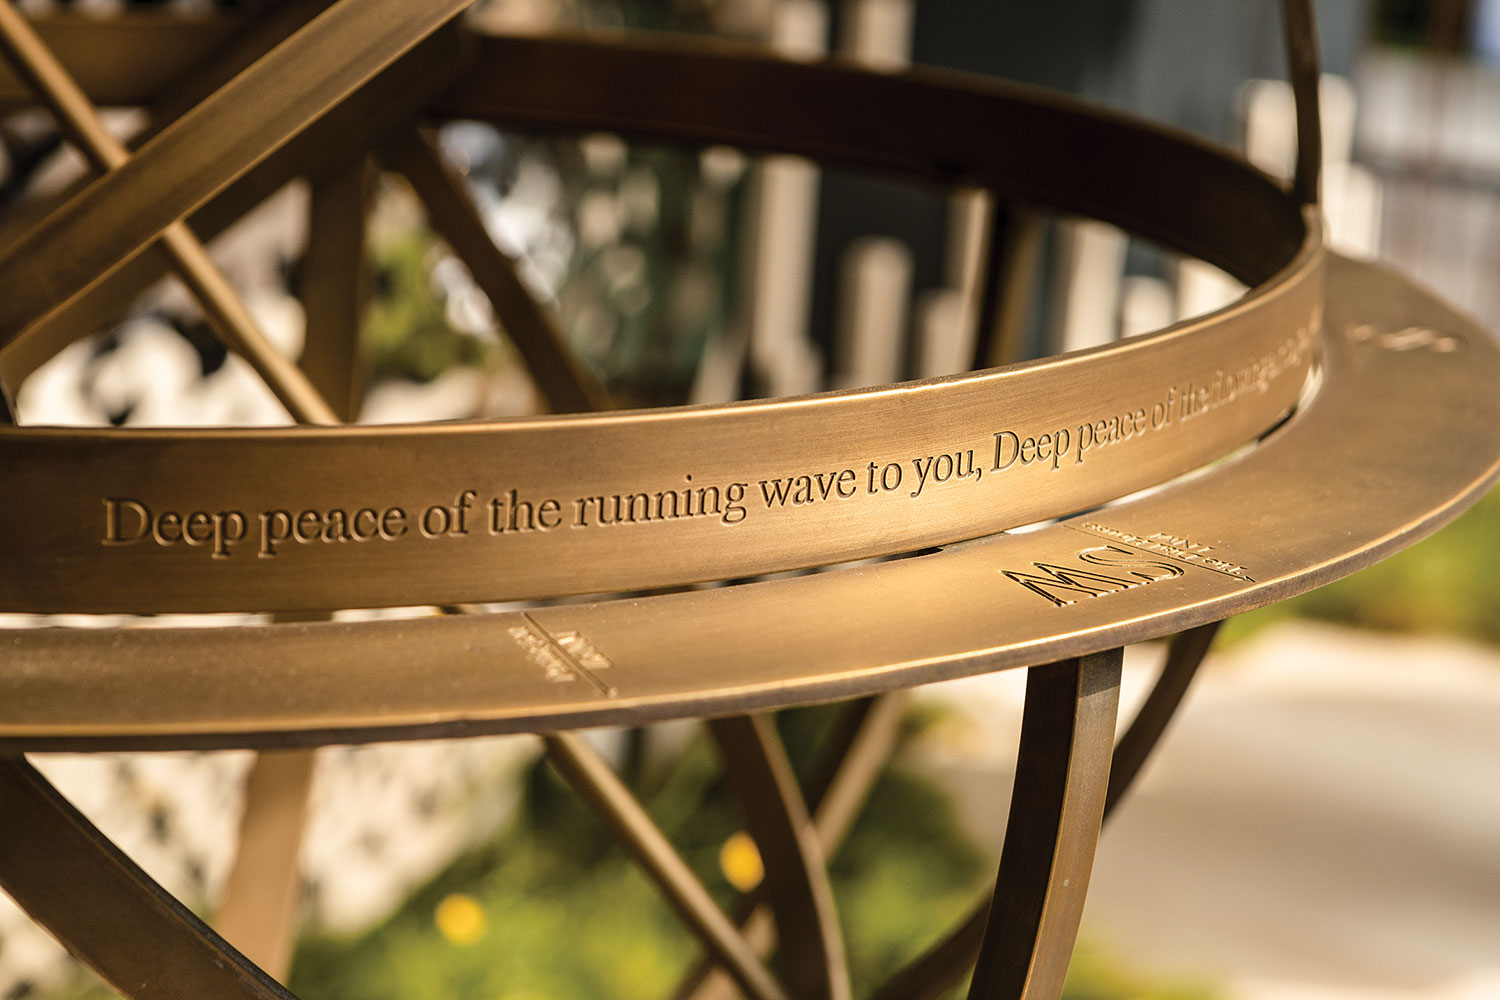 The inscription reads "Deep peace of the running wave to you."